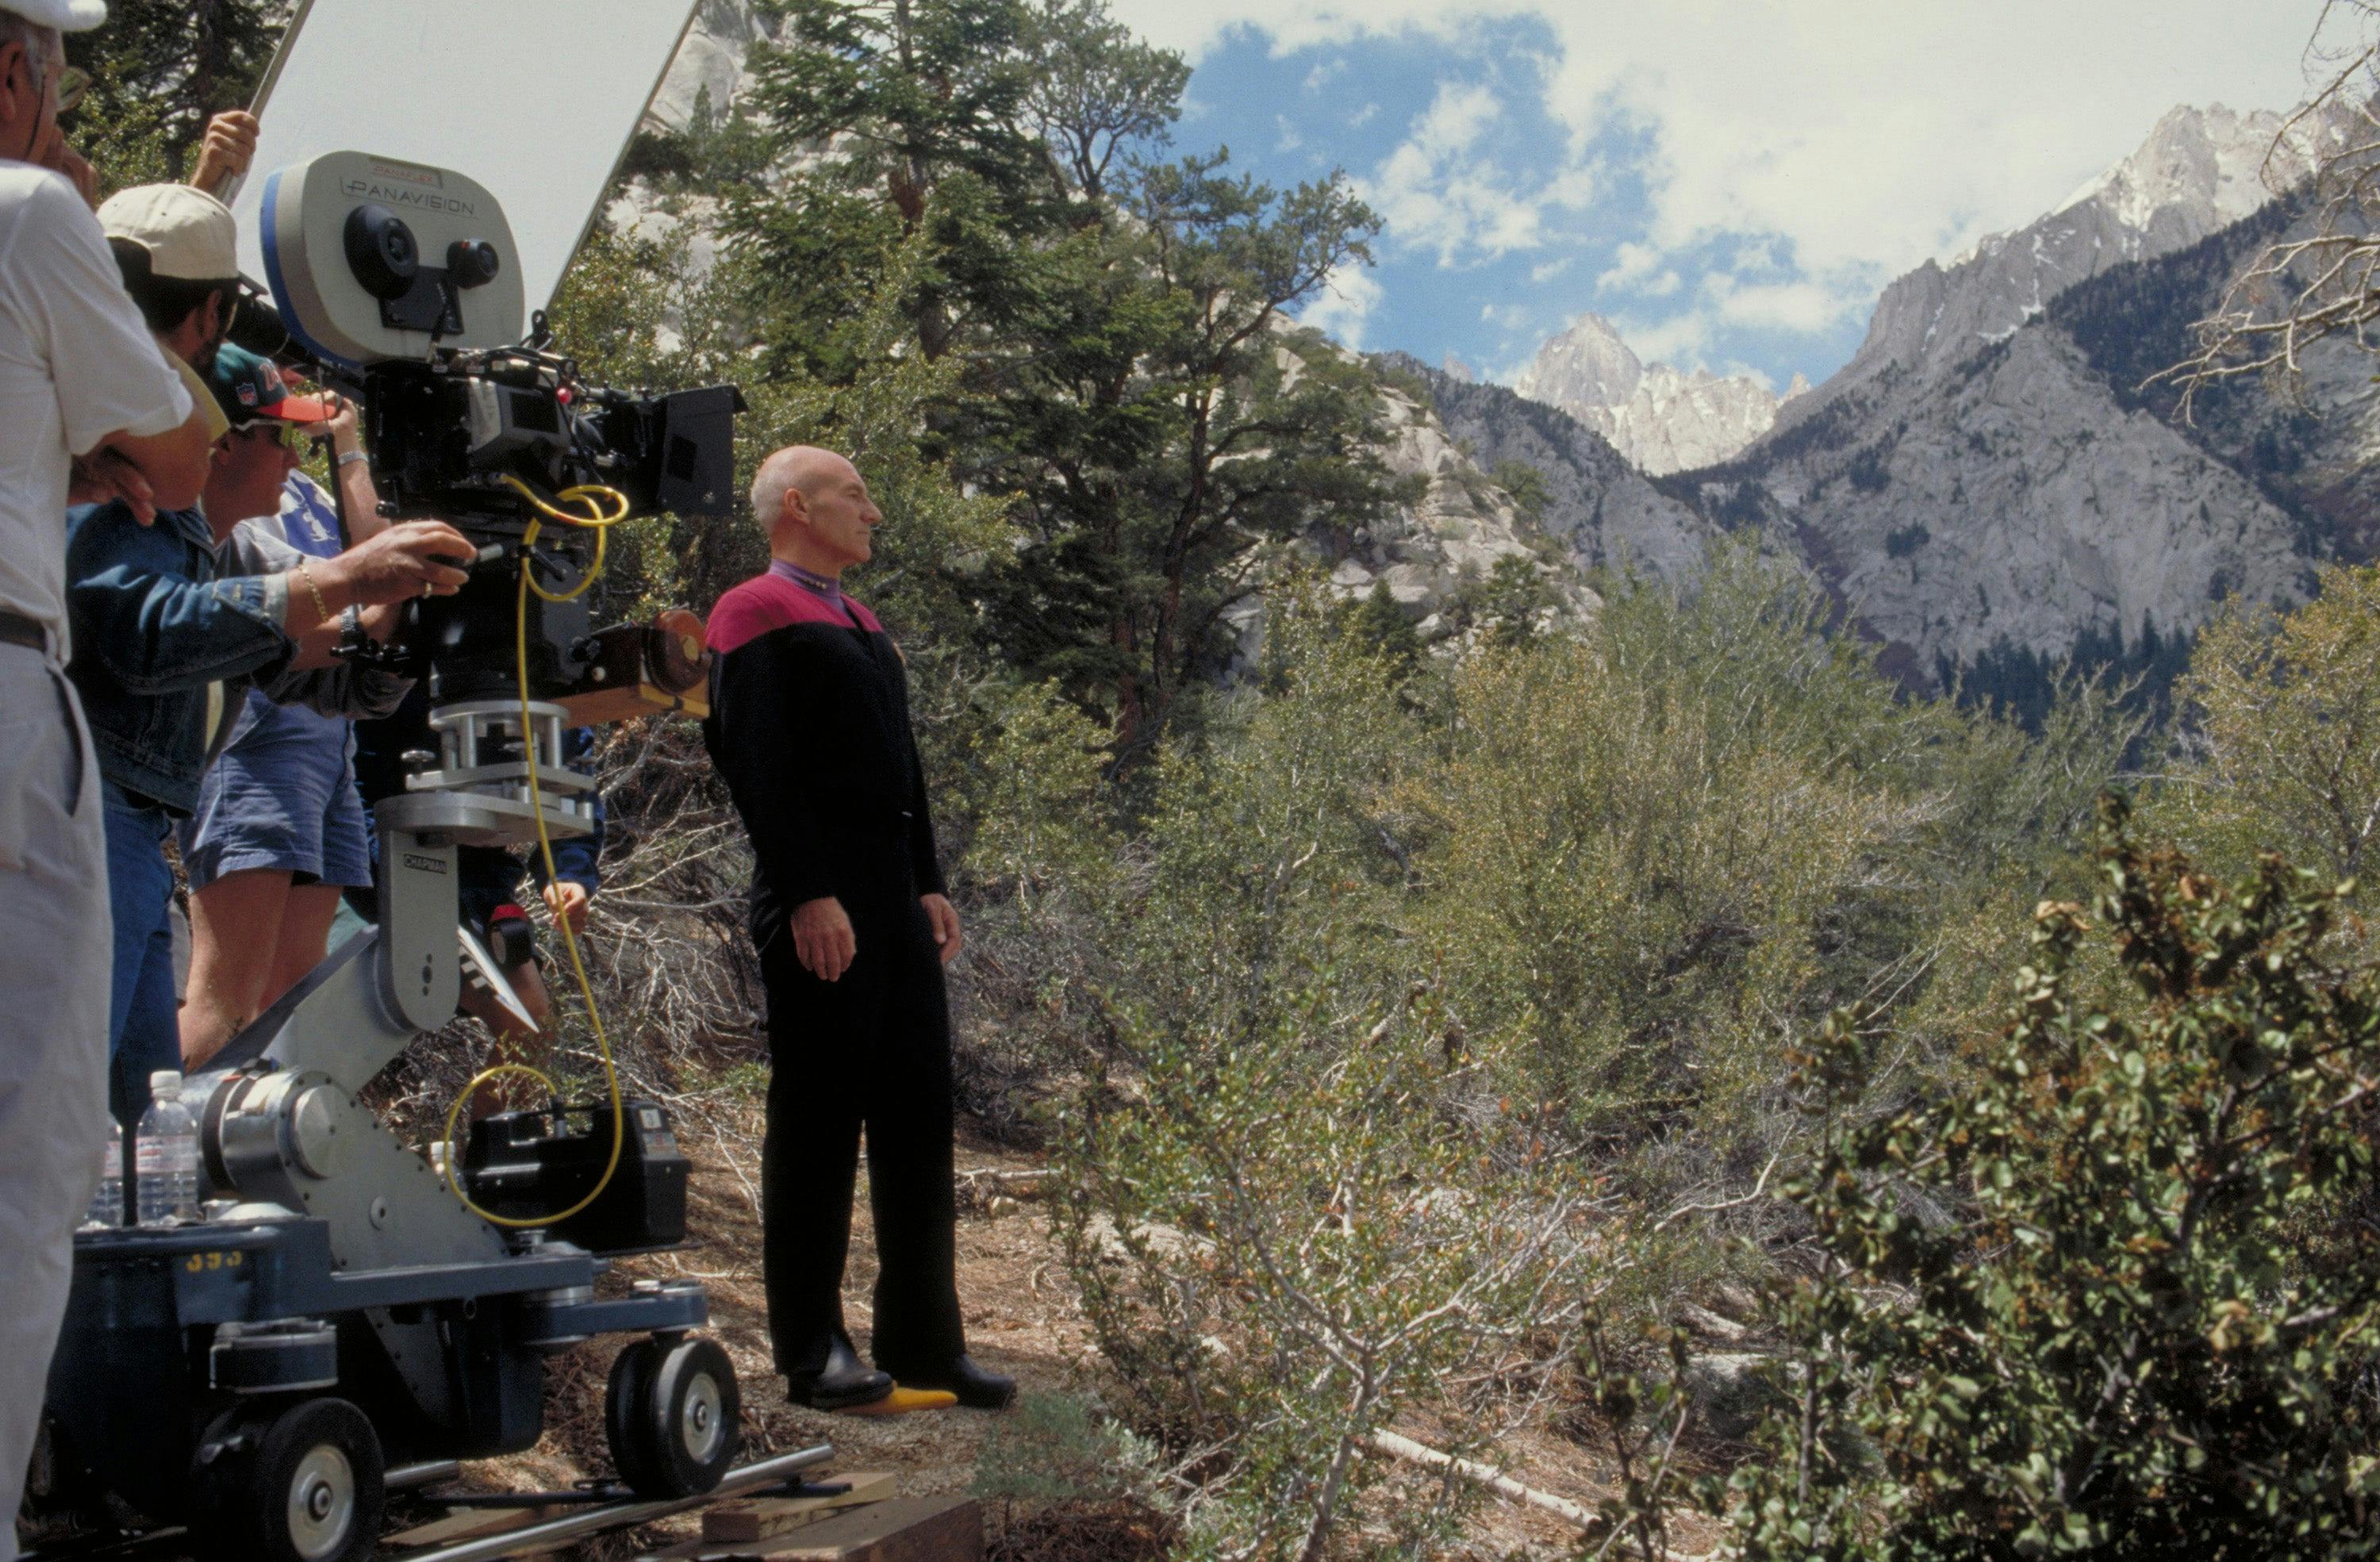 Patrick Stewart, in Starfleet uniform, looking off into the landscape of trees and mountains as a camera and crew capture the moment on set of Star Trek Generations